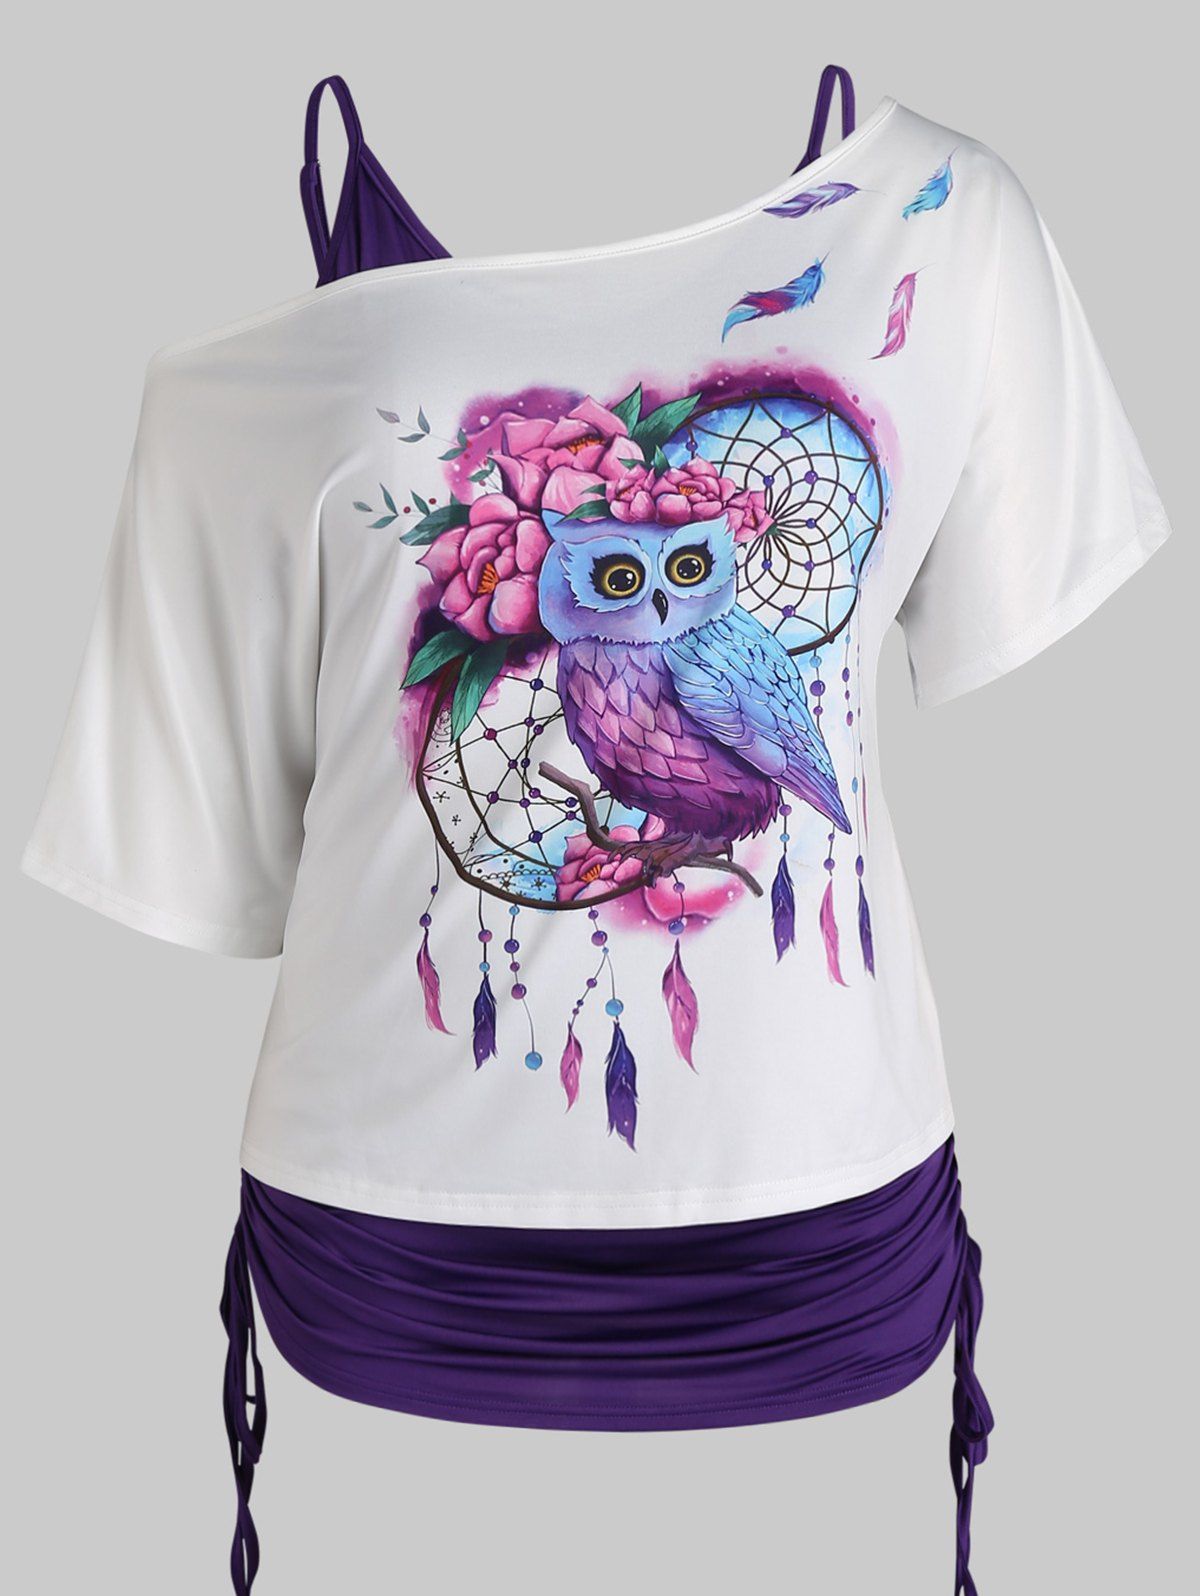 Plus Size Solid Color Cinched Tank Top and Dreamcatcher Floral Owl Print Skew Neck Ruched T Shirt Summer Casual Set - PURPLE 5X